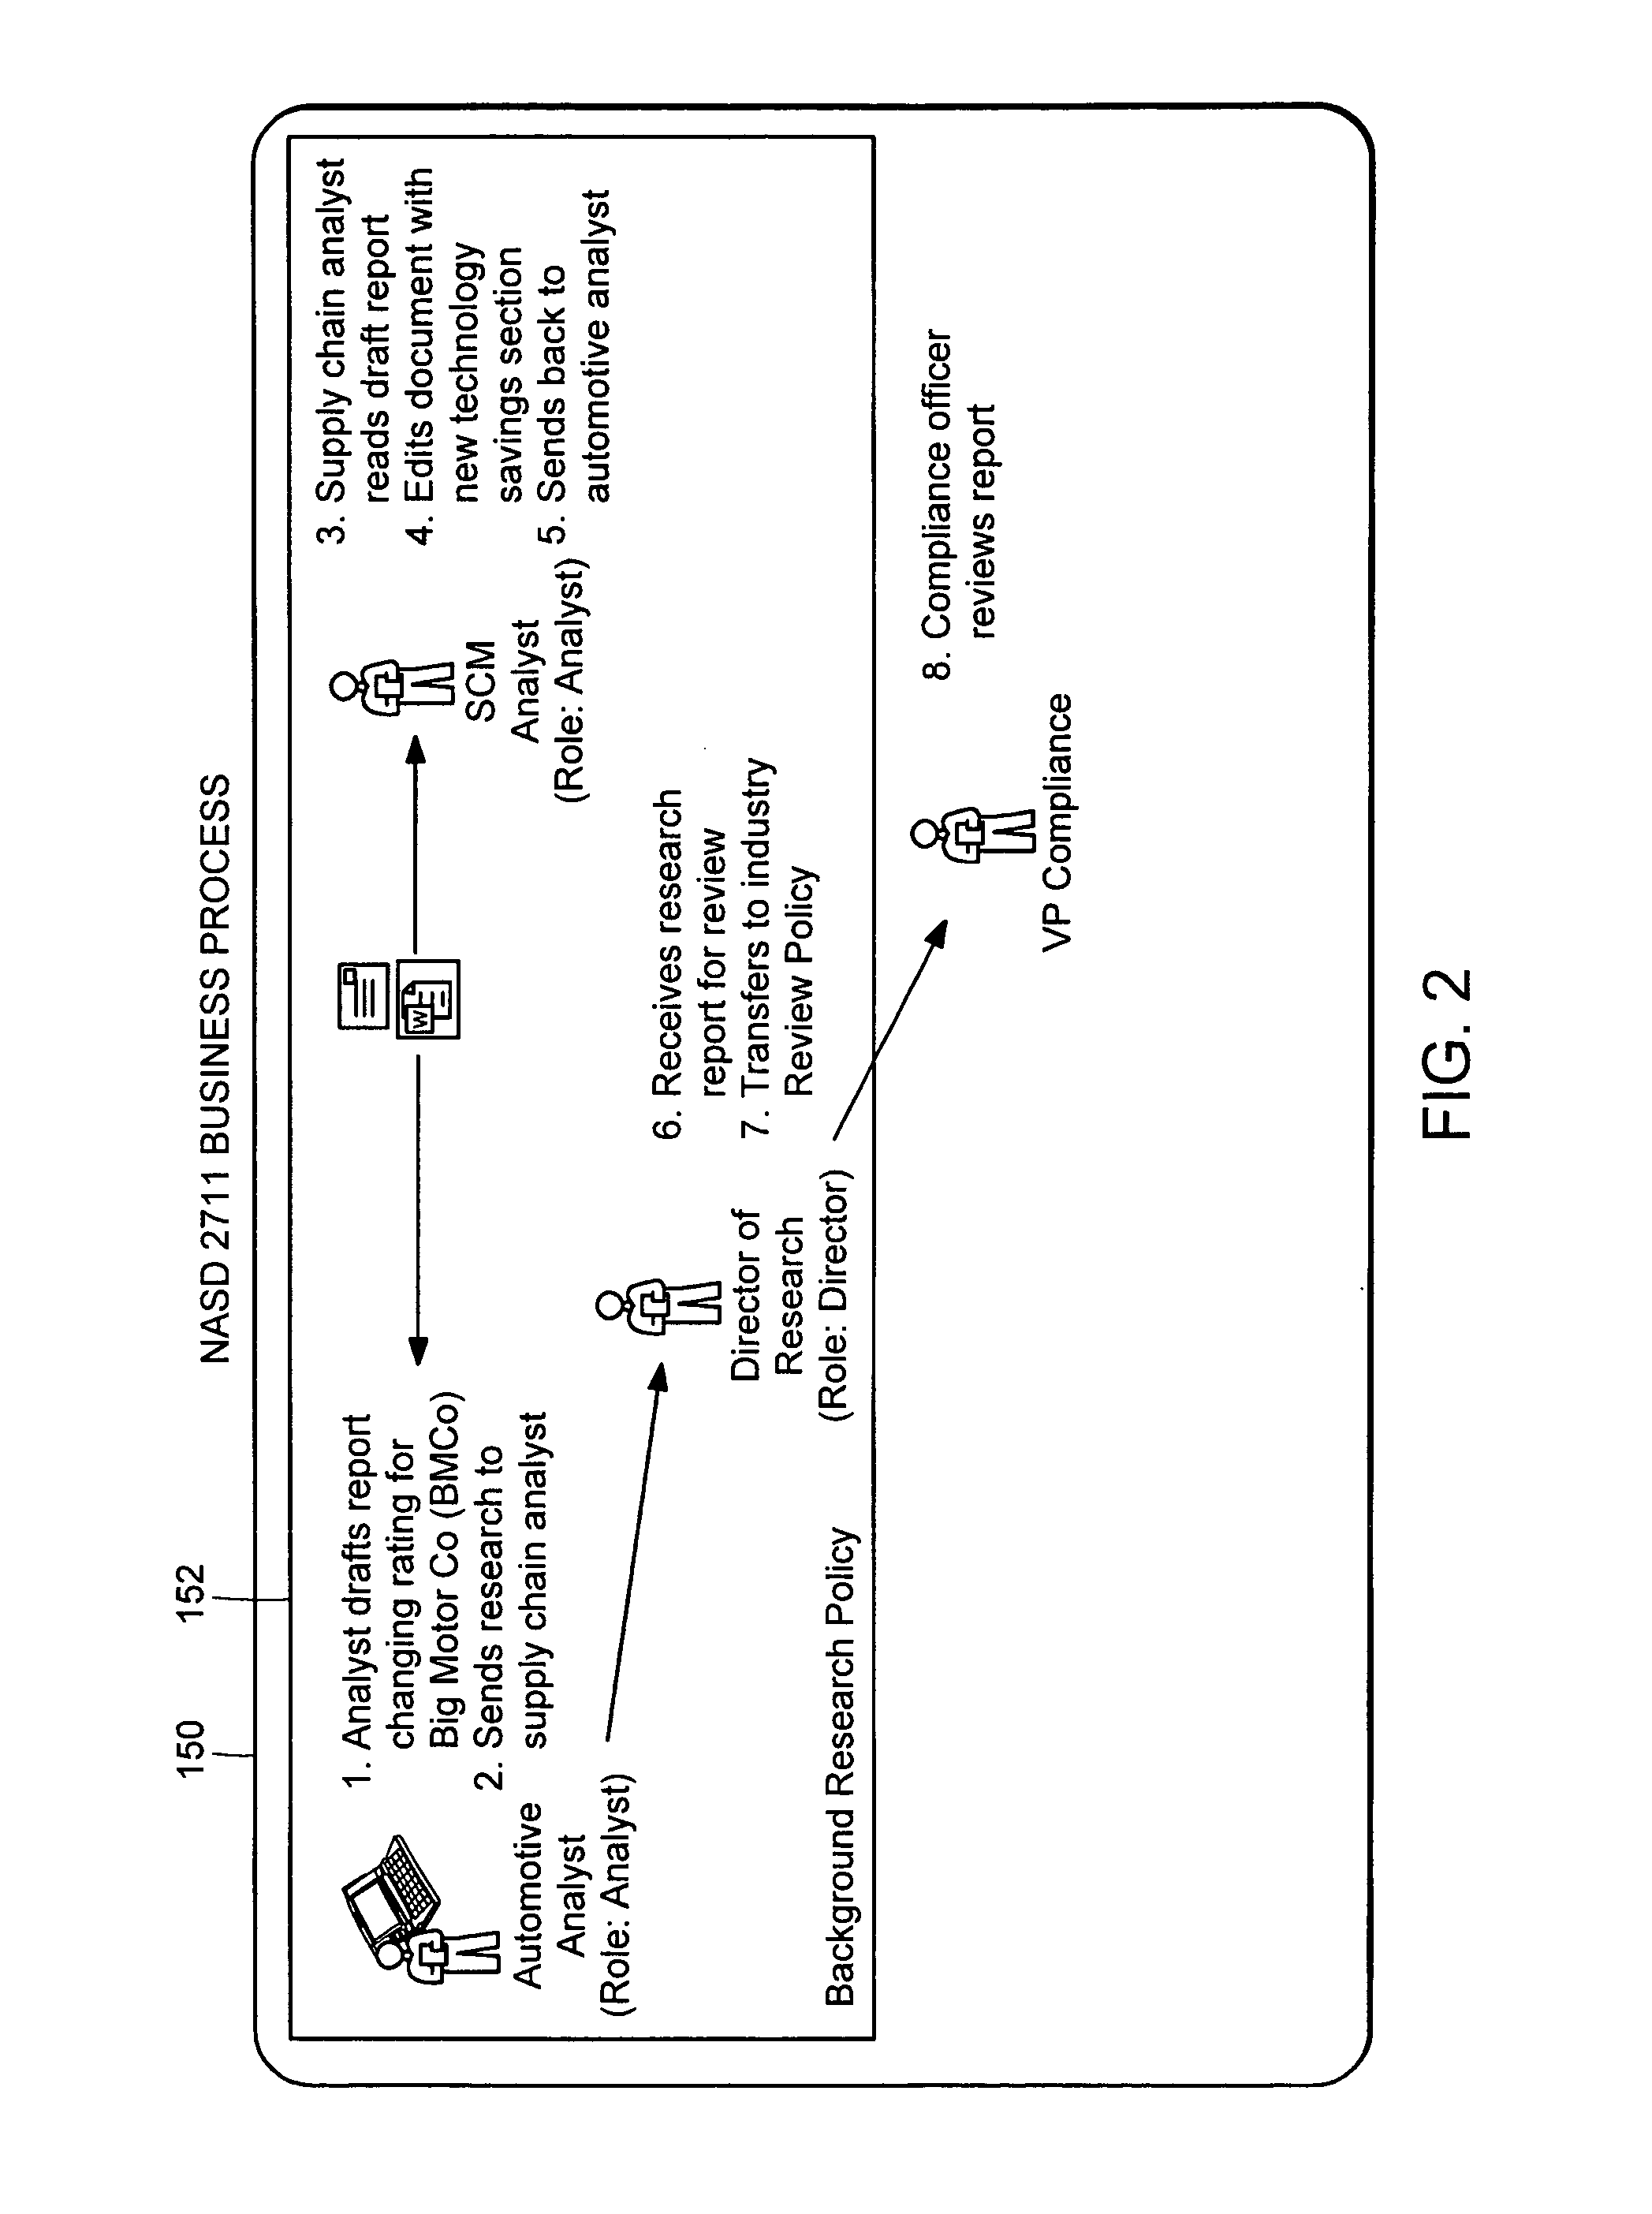 Computer method and apparatus for securely managing data objects in a distributed context